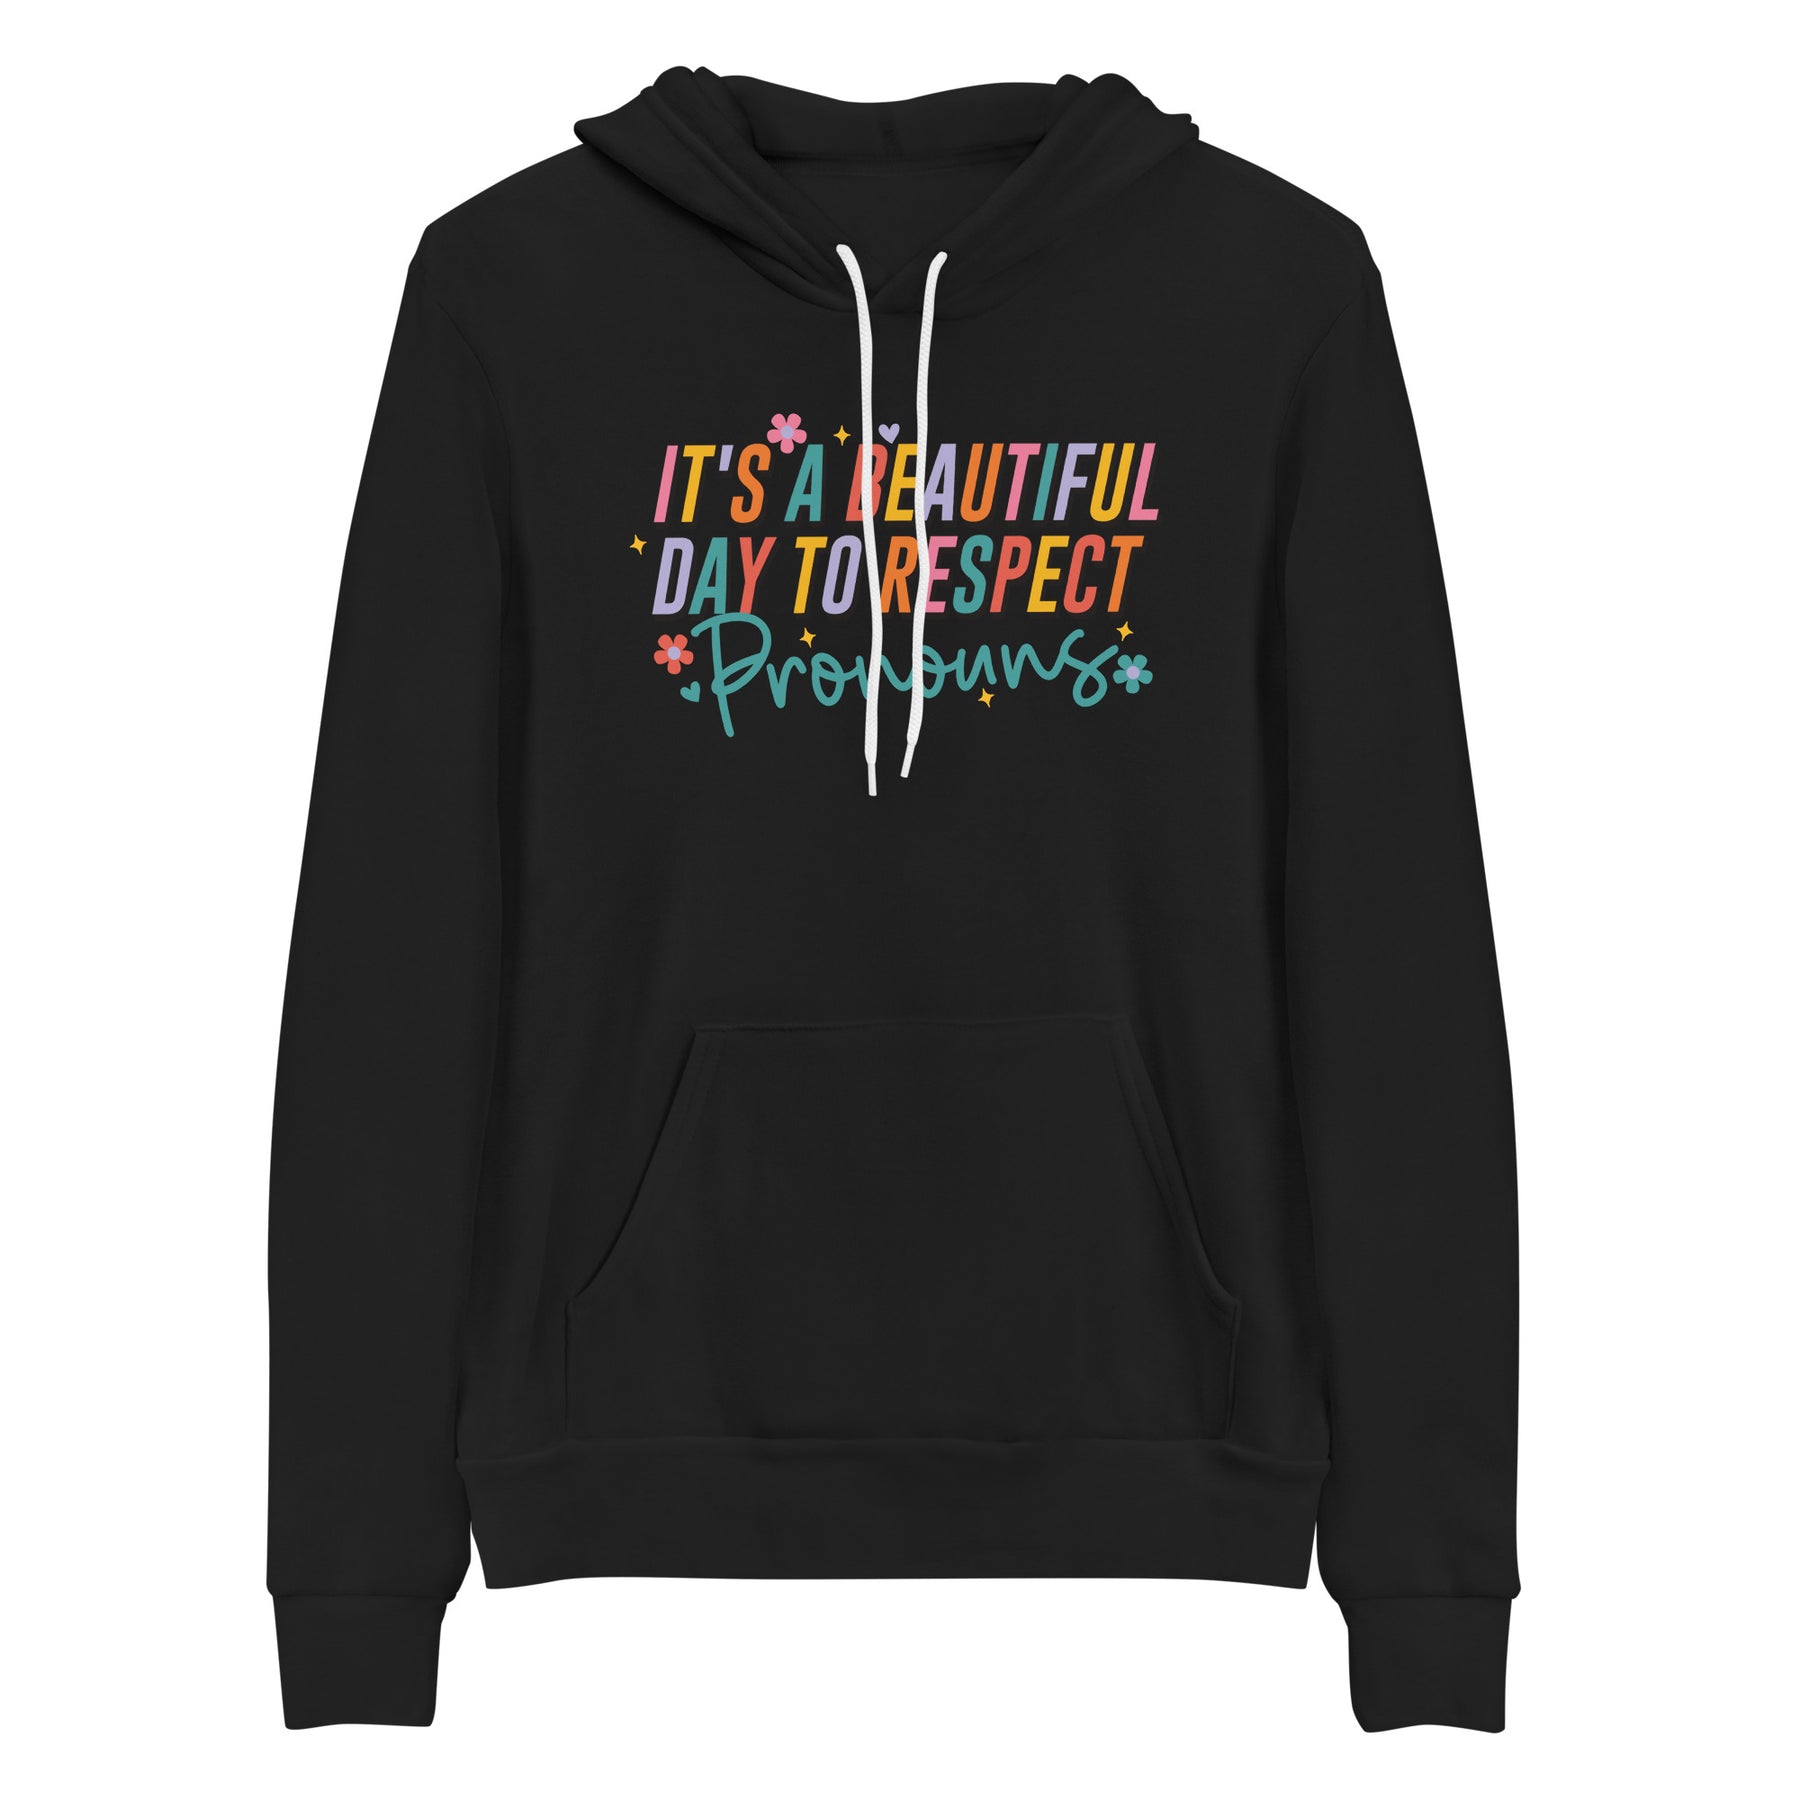 It's a Beautiful Day to Respect Pronouns Hoodie